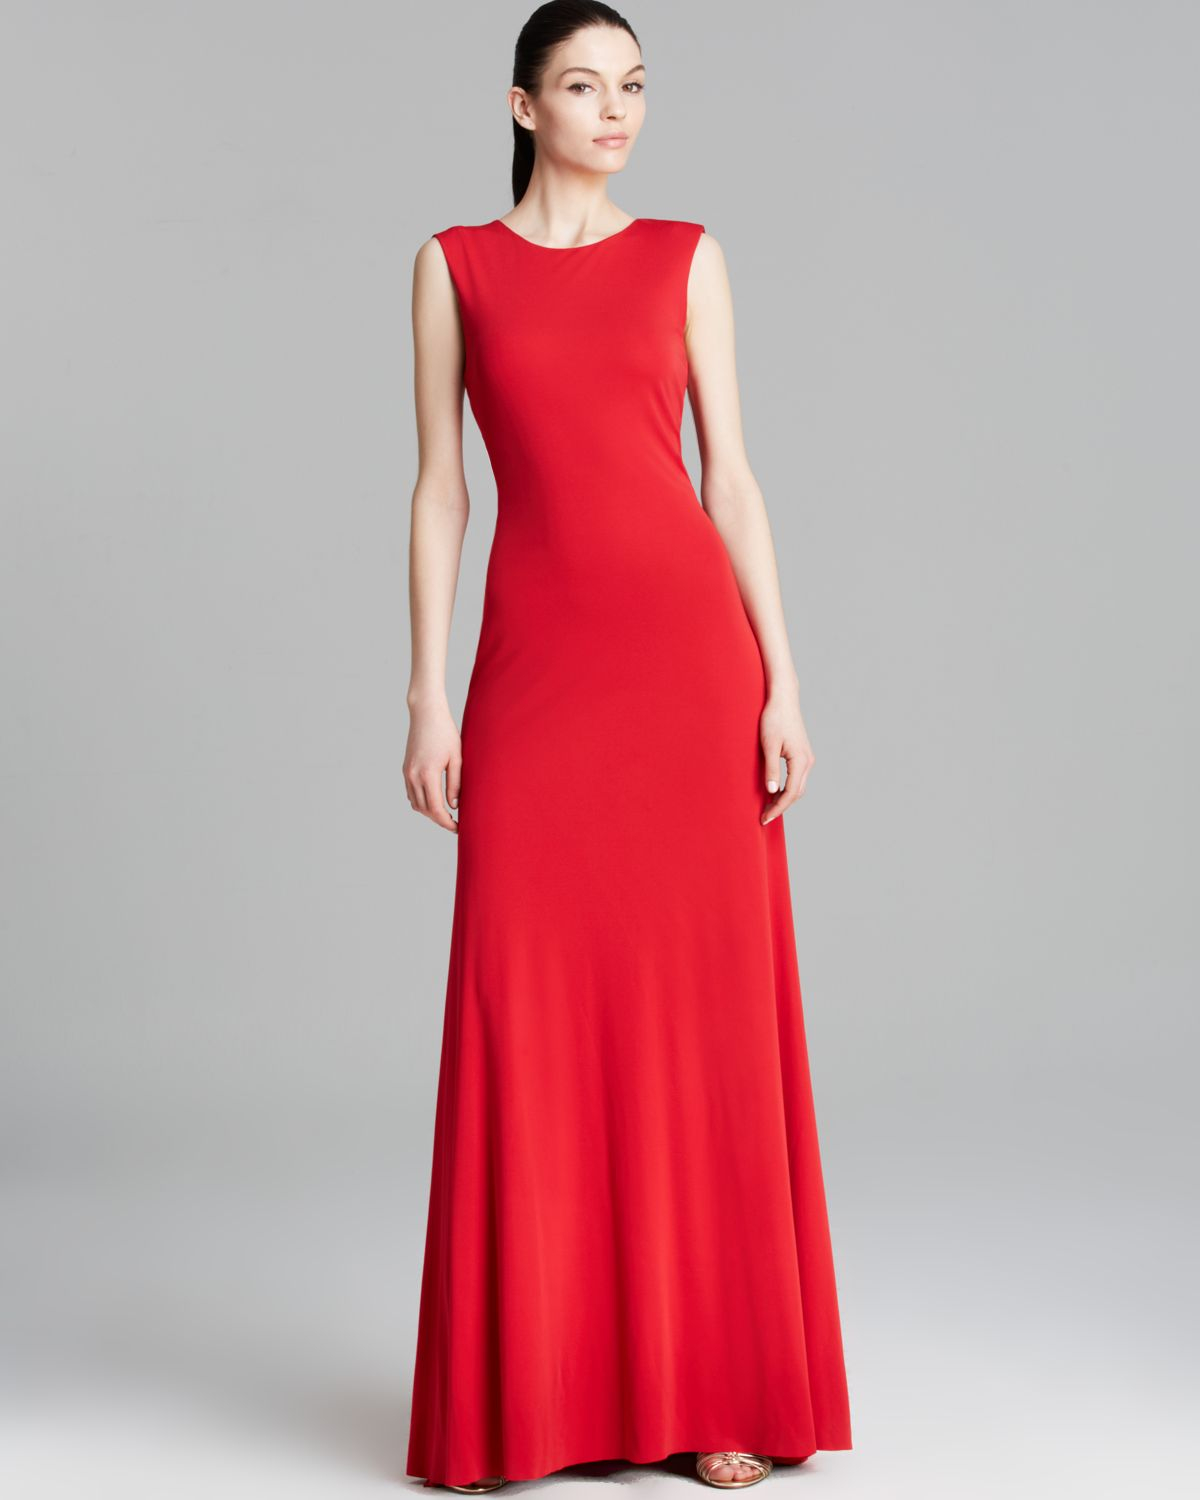 Lyst - Vera Wang Gown - Cap Sleeve Open Back Jersey in Red